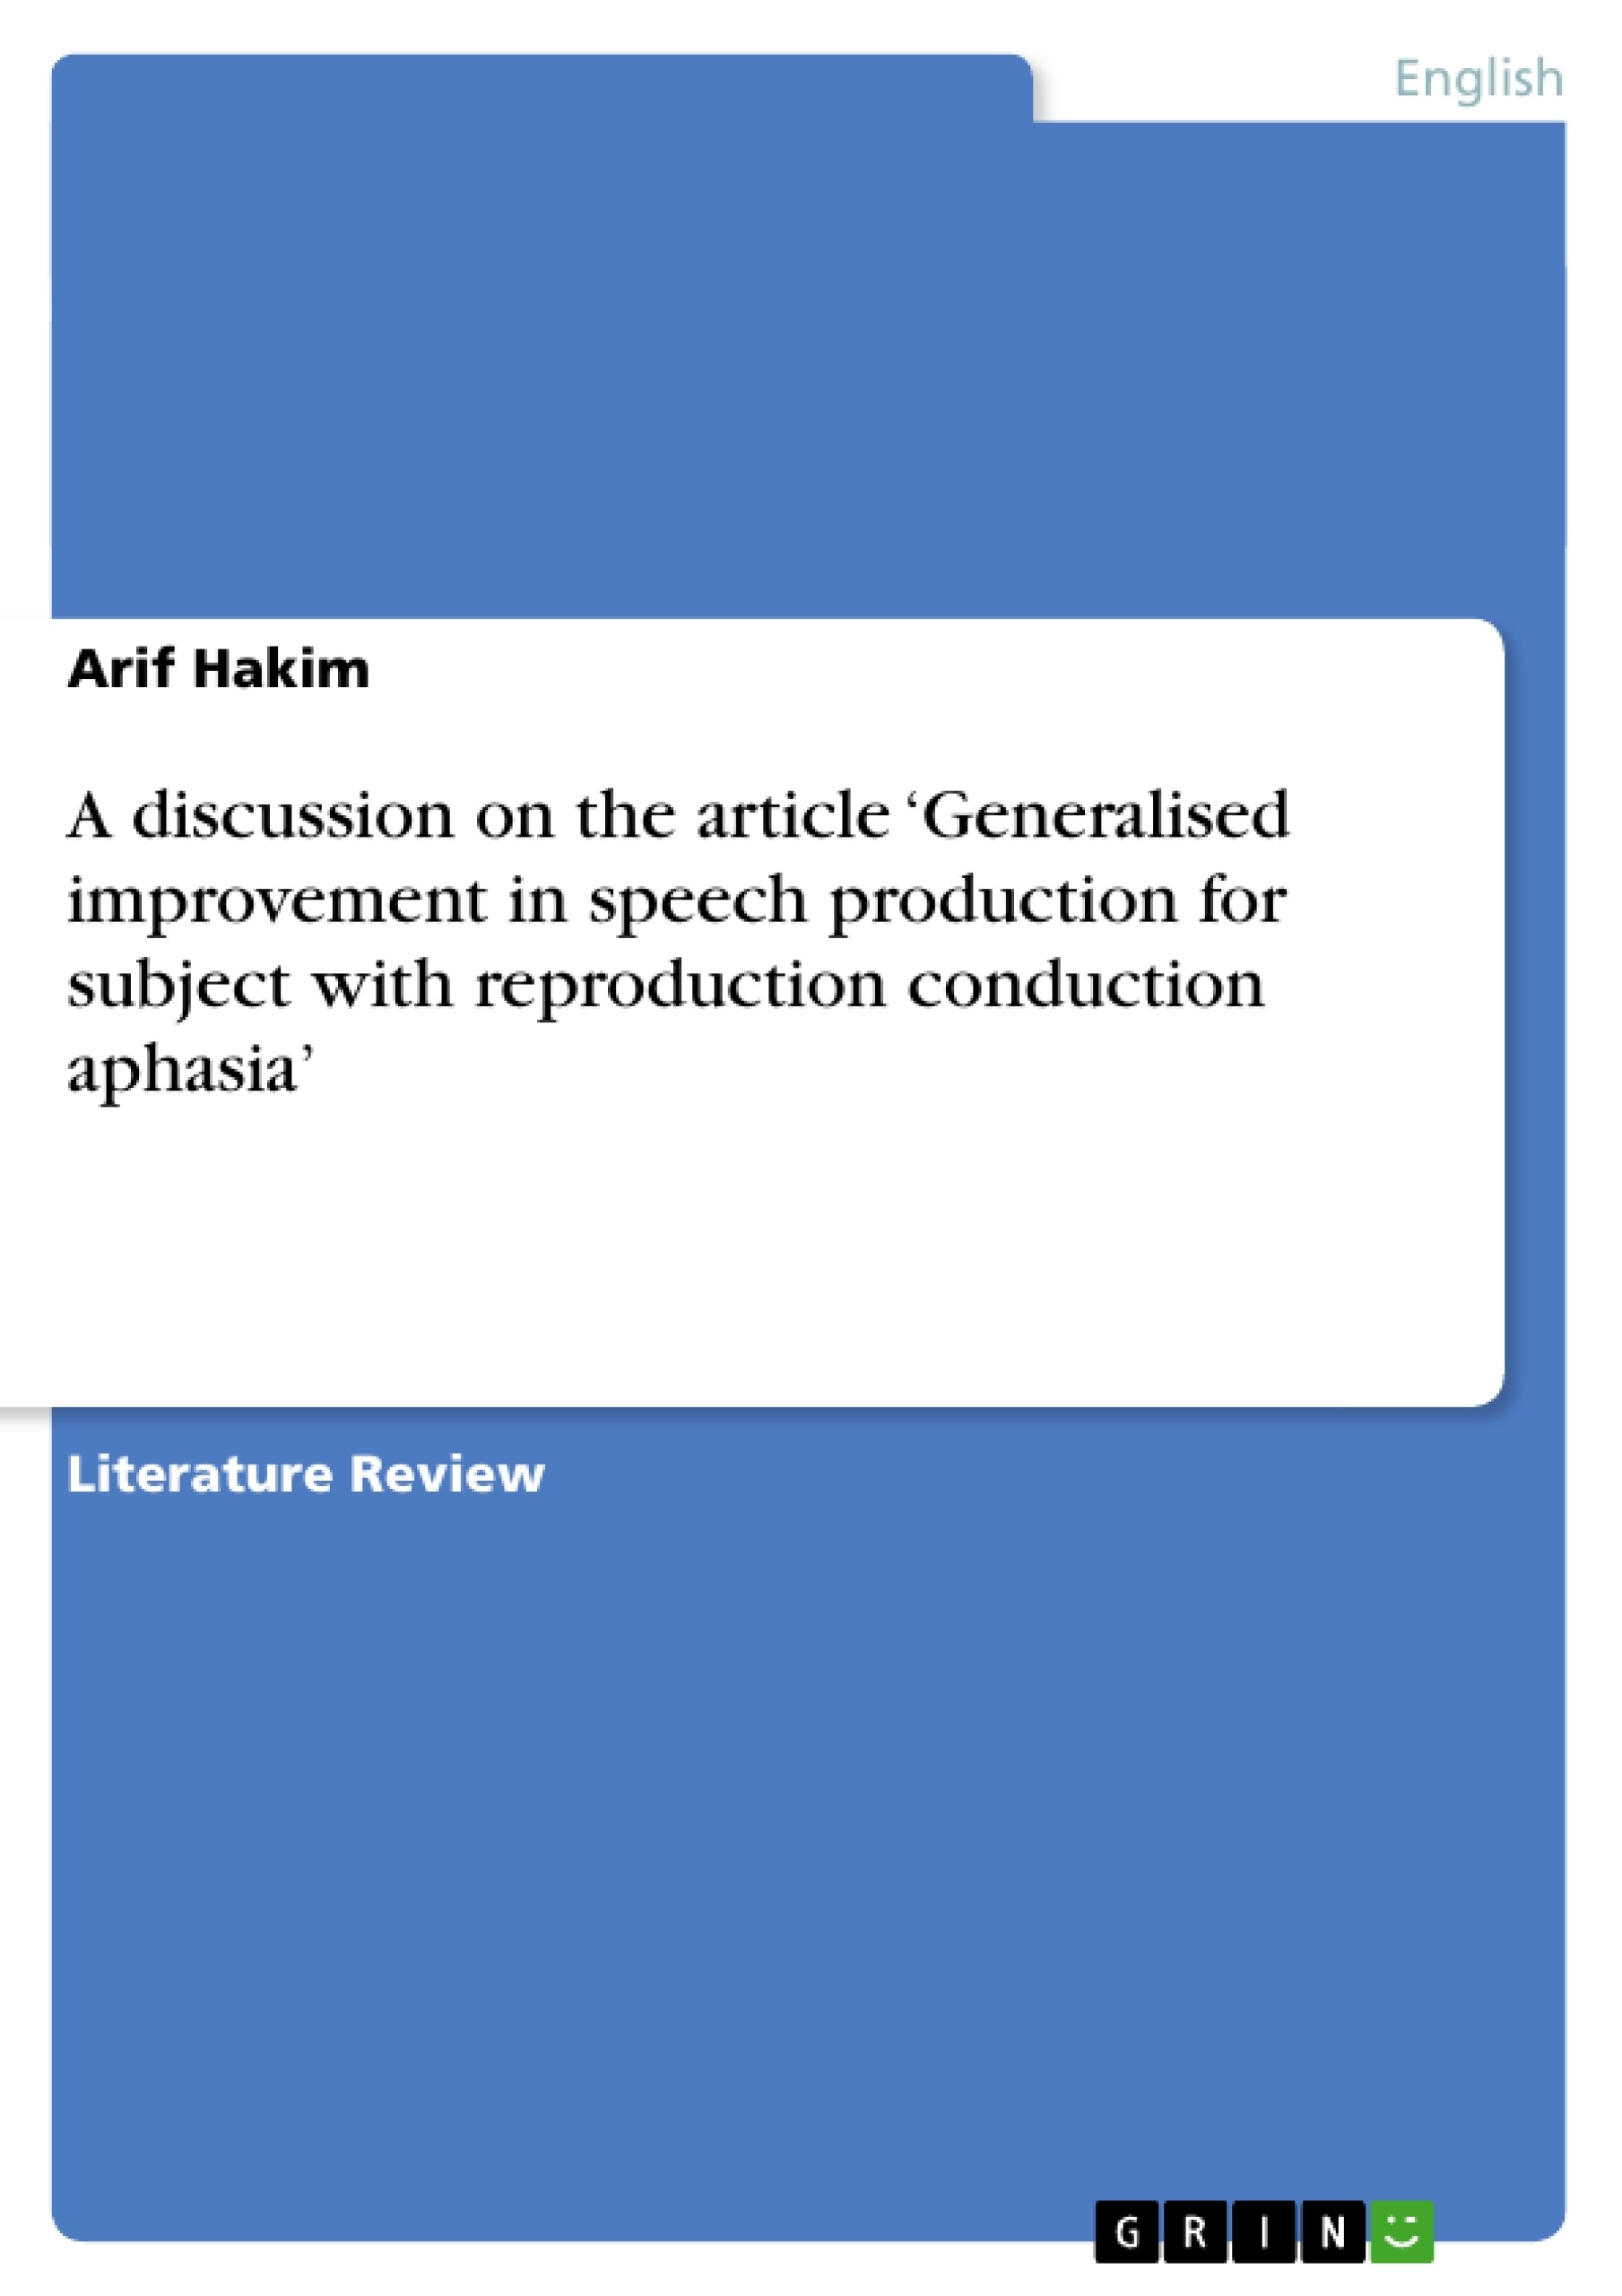 Título: A discussion on the article ‘Generalised improvement in speech production for subject with reproduction conduction aphasia’